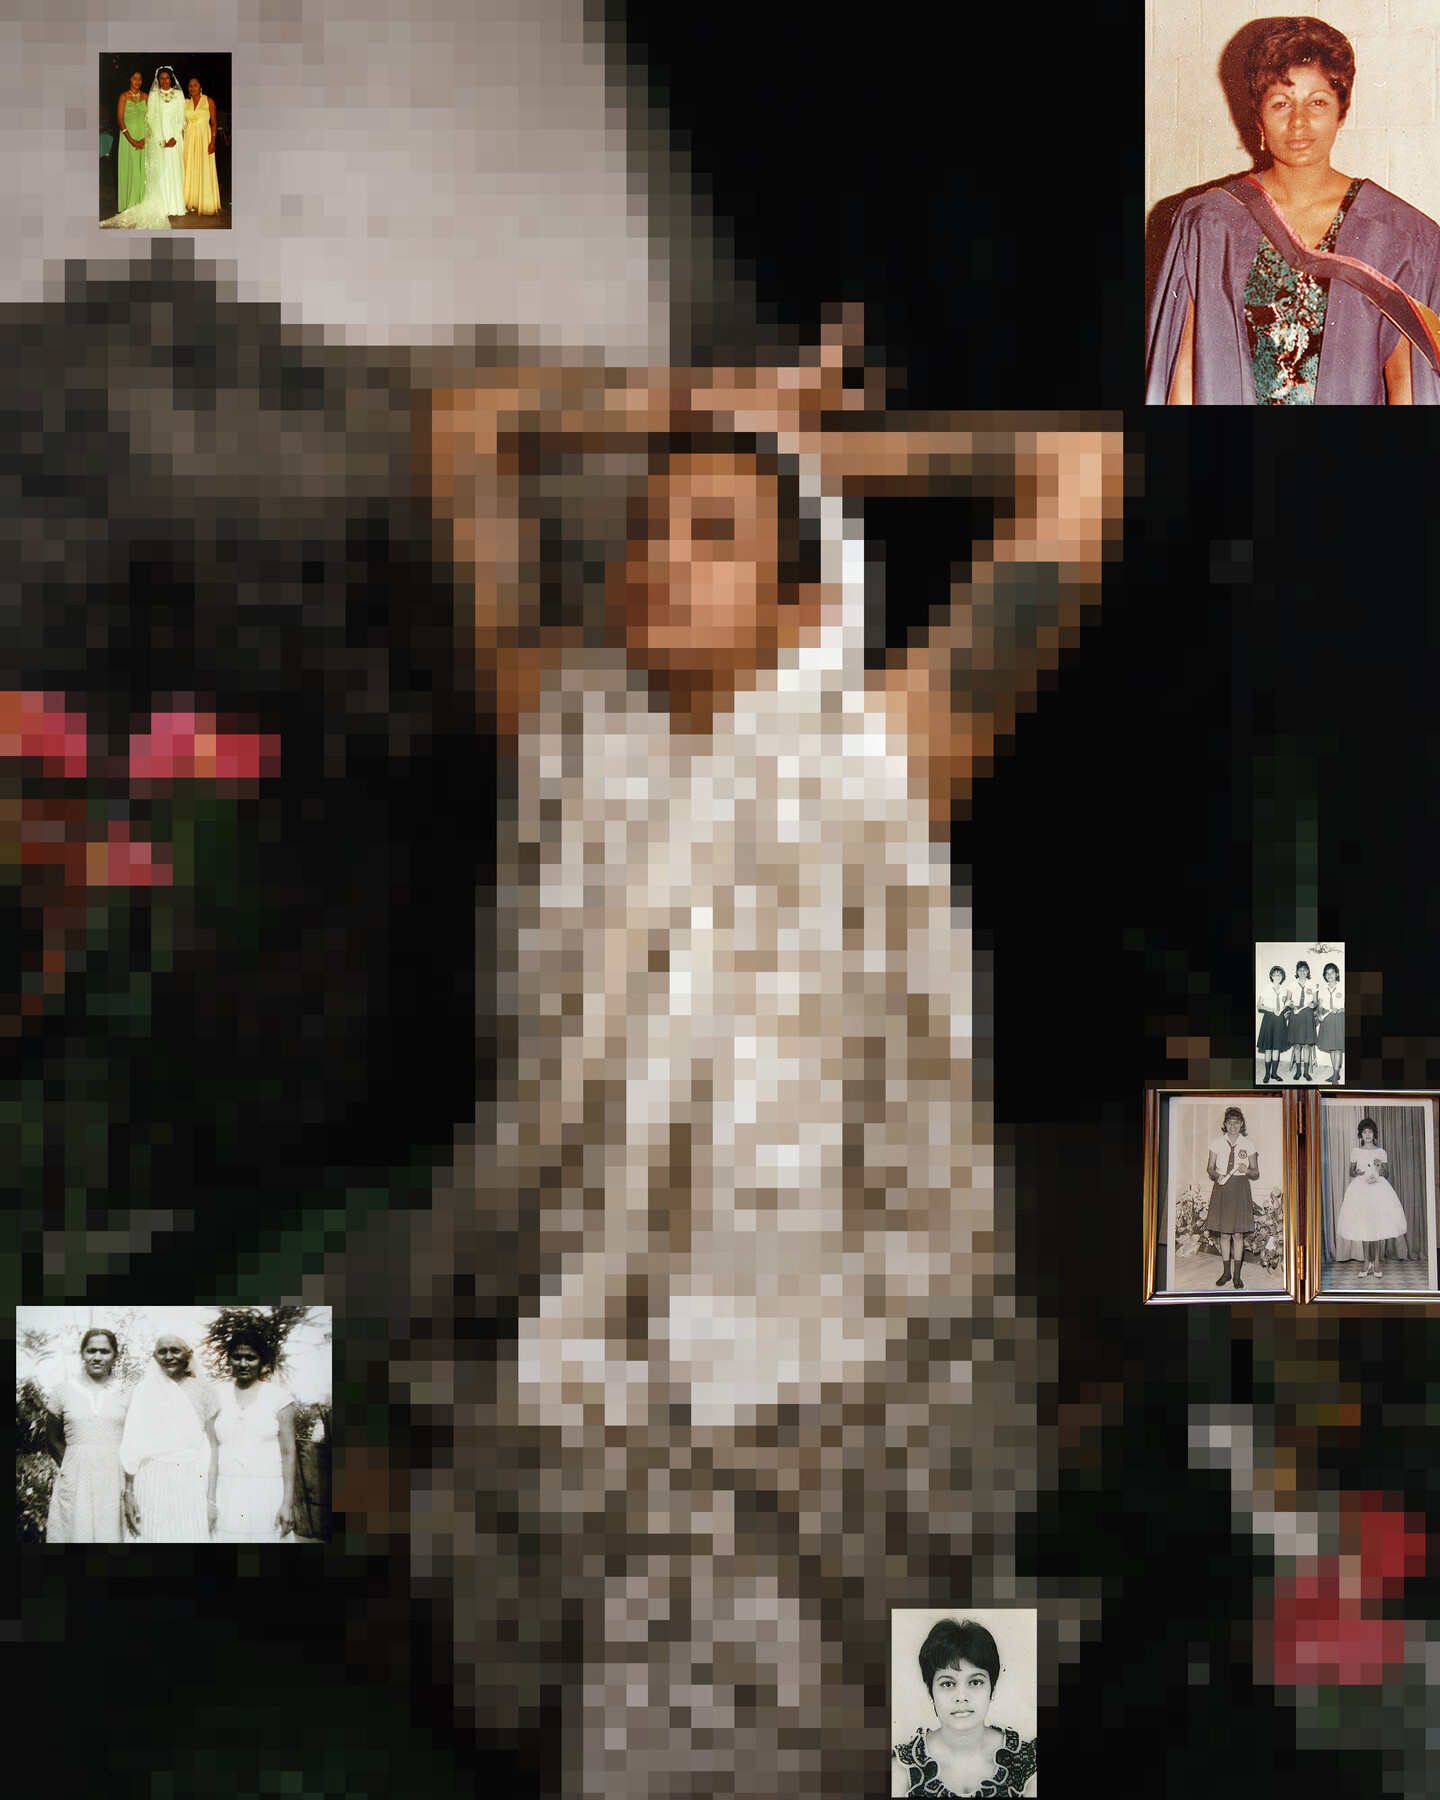 A pixelated image shows a person dressed in white with her arms raised, resting on her head. Placed around her are black-and-white and color photographs of medium- and dark-complexioned women in formal gowns, saris, and school uniforms.